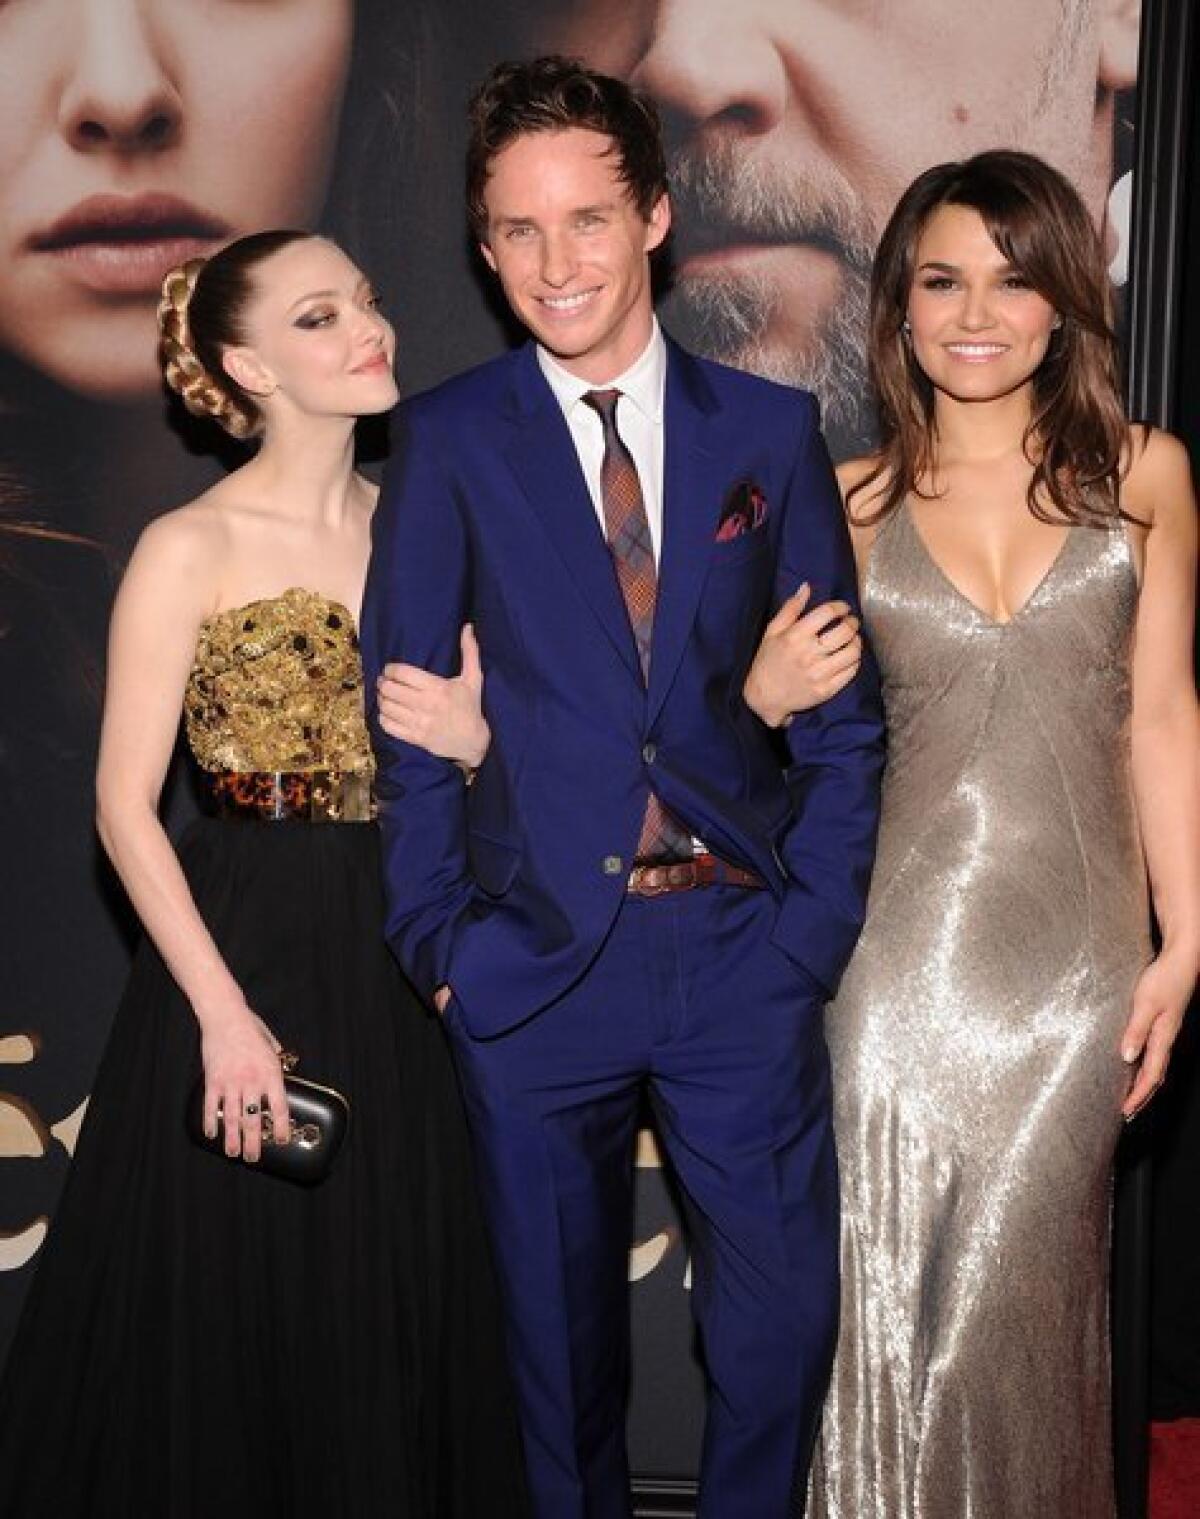 Amanda Seyfried, left, Eddie Redmayne and Samantha Barks attend the premiere of "Les Miserables" at the Ziegfeld Theatre on Monday in New York.